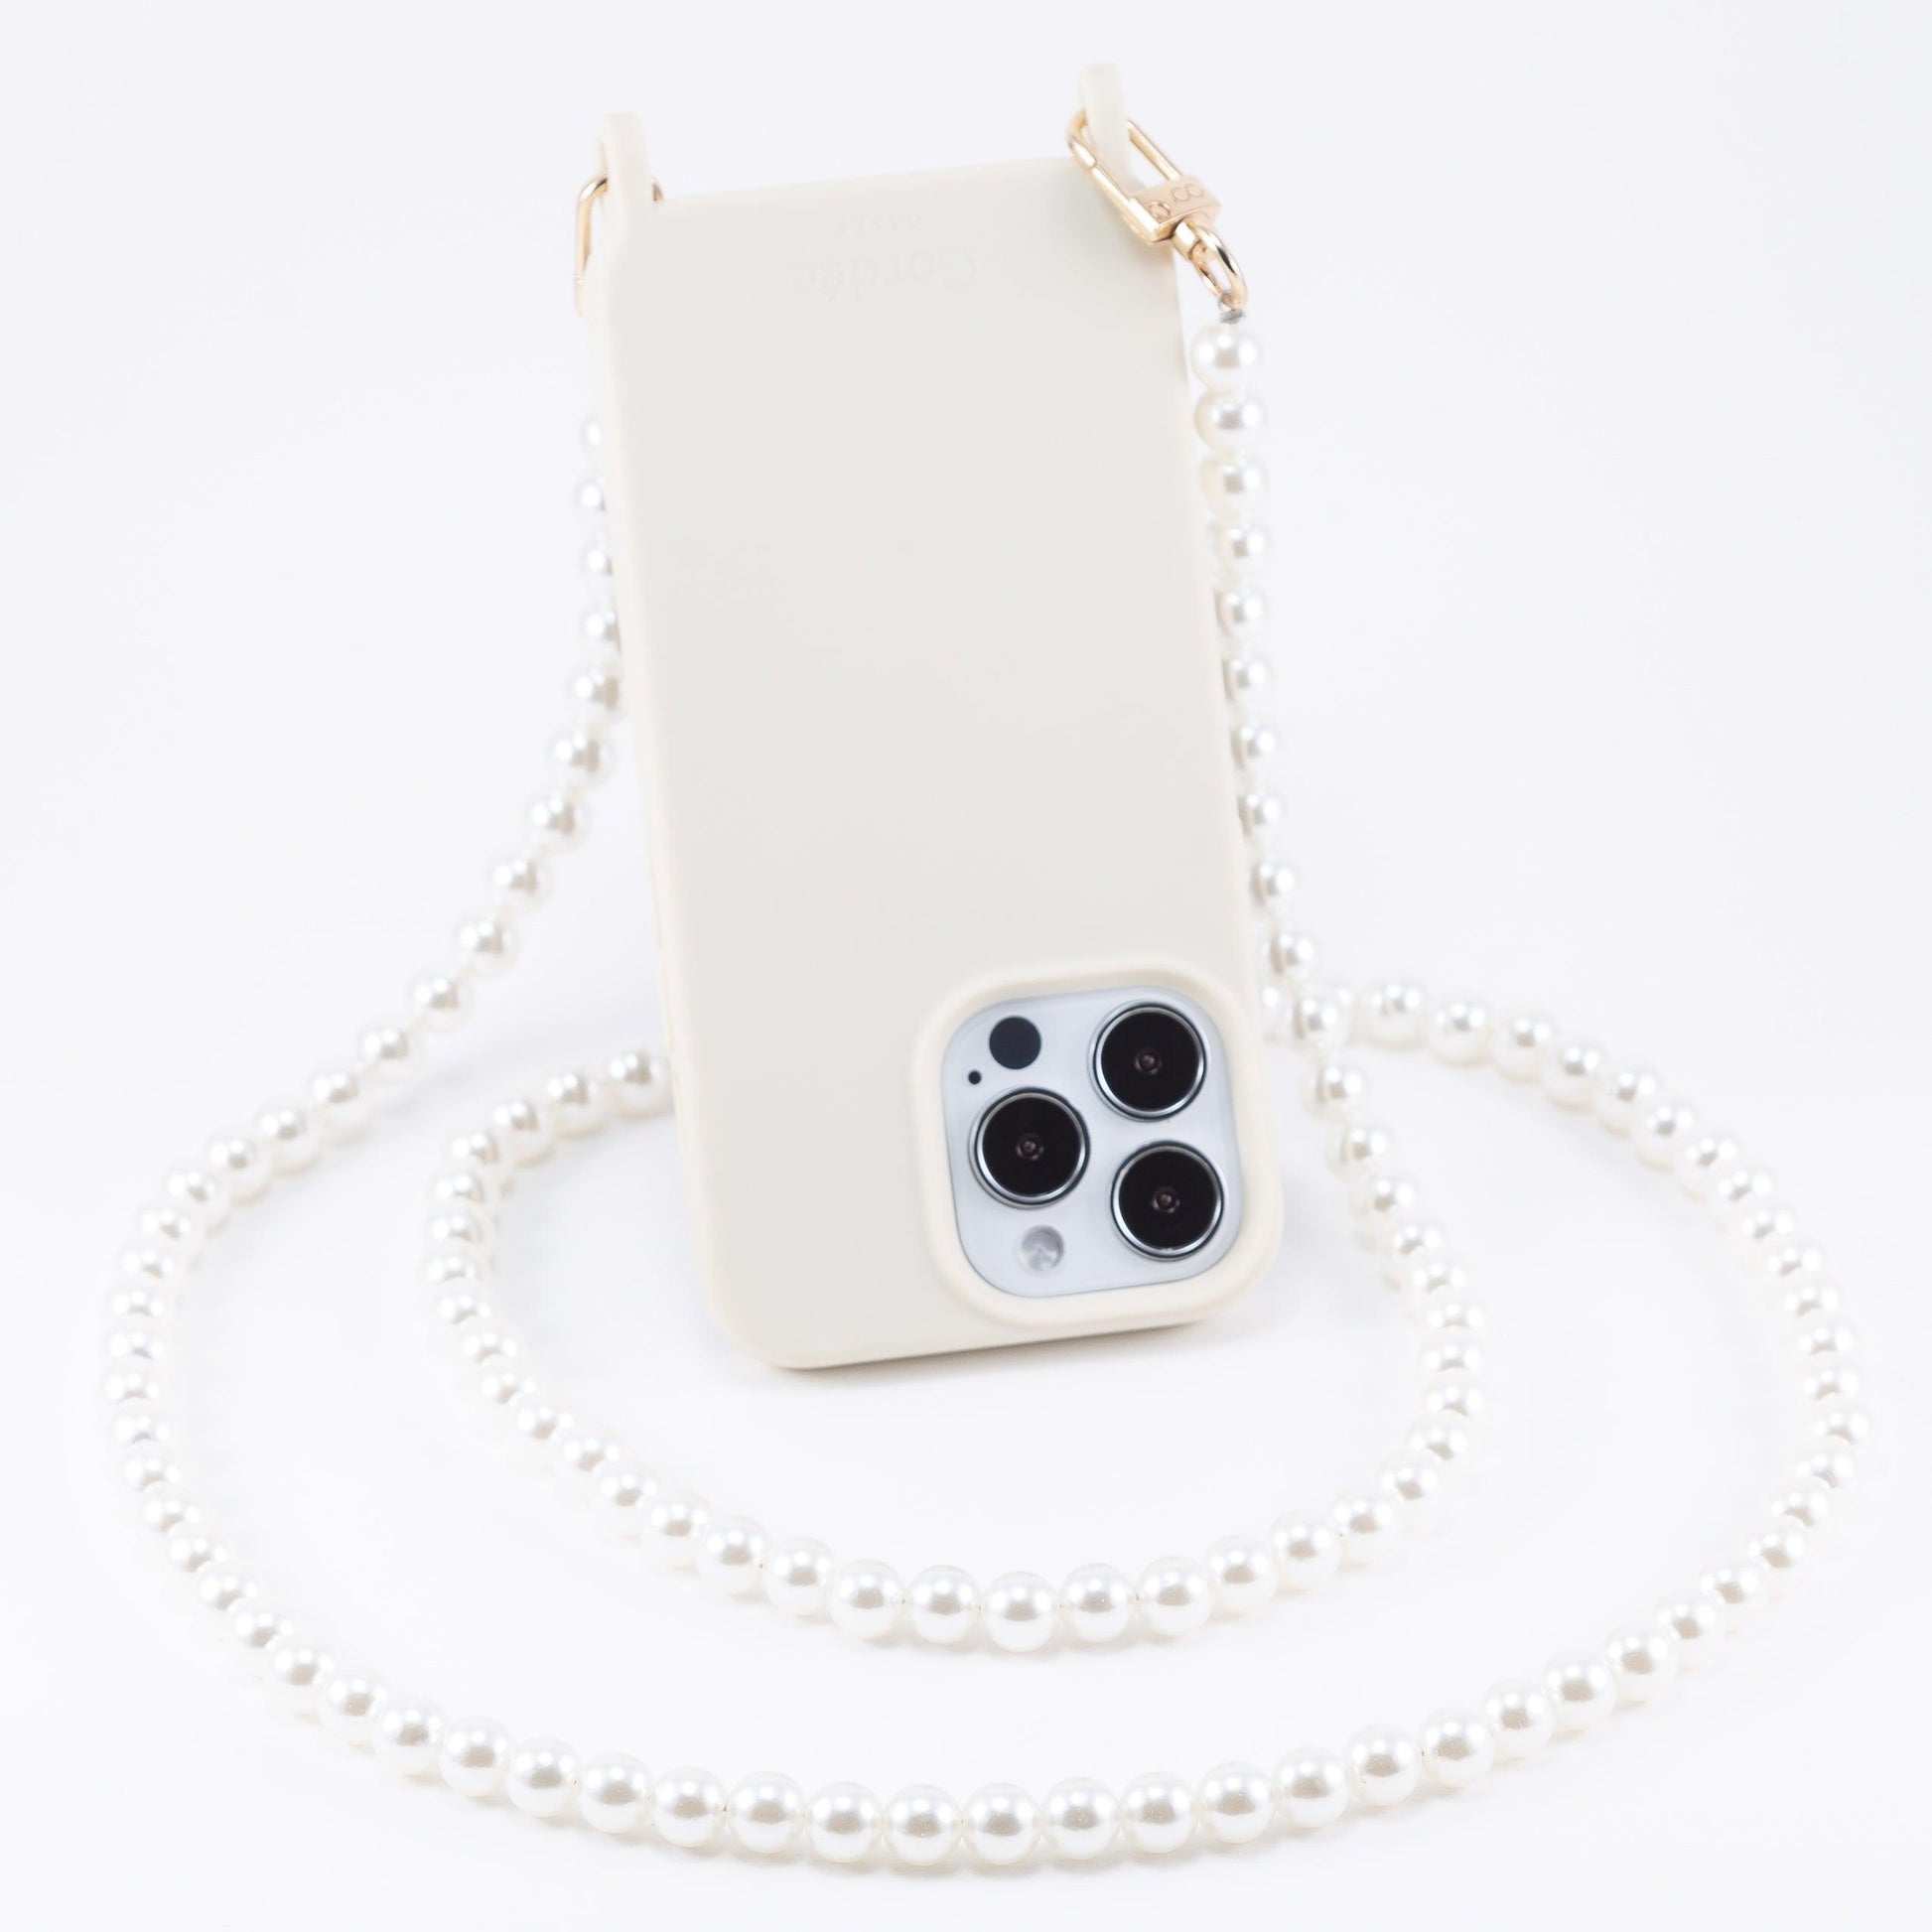 White Special-shaped Fake Pearls With Letter C Mobile Phone Chain